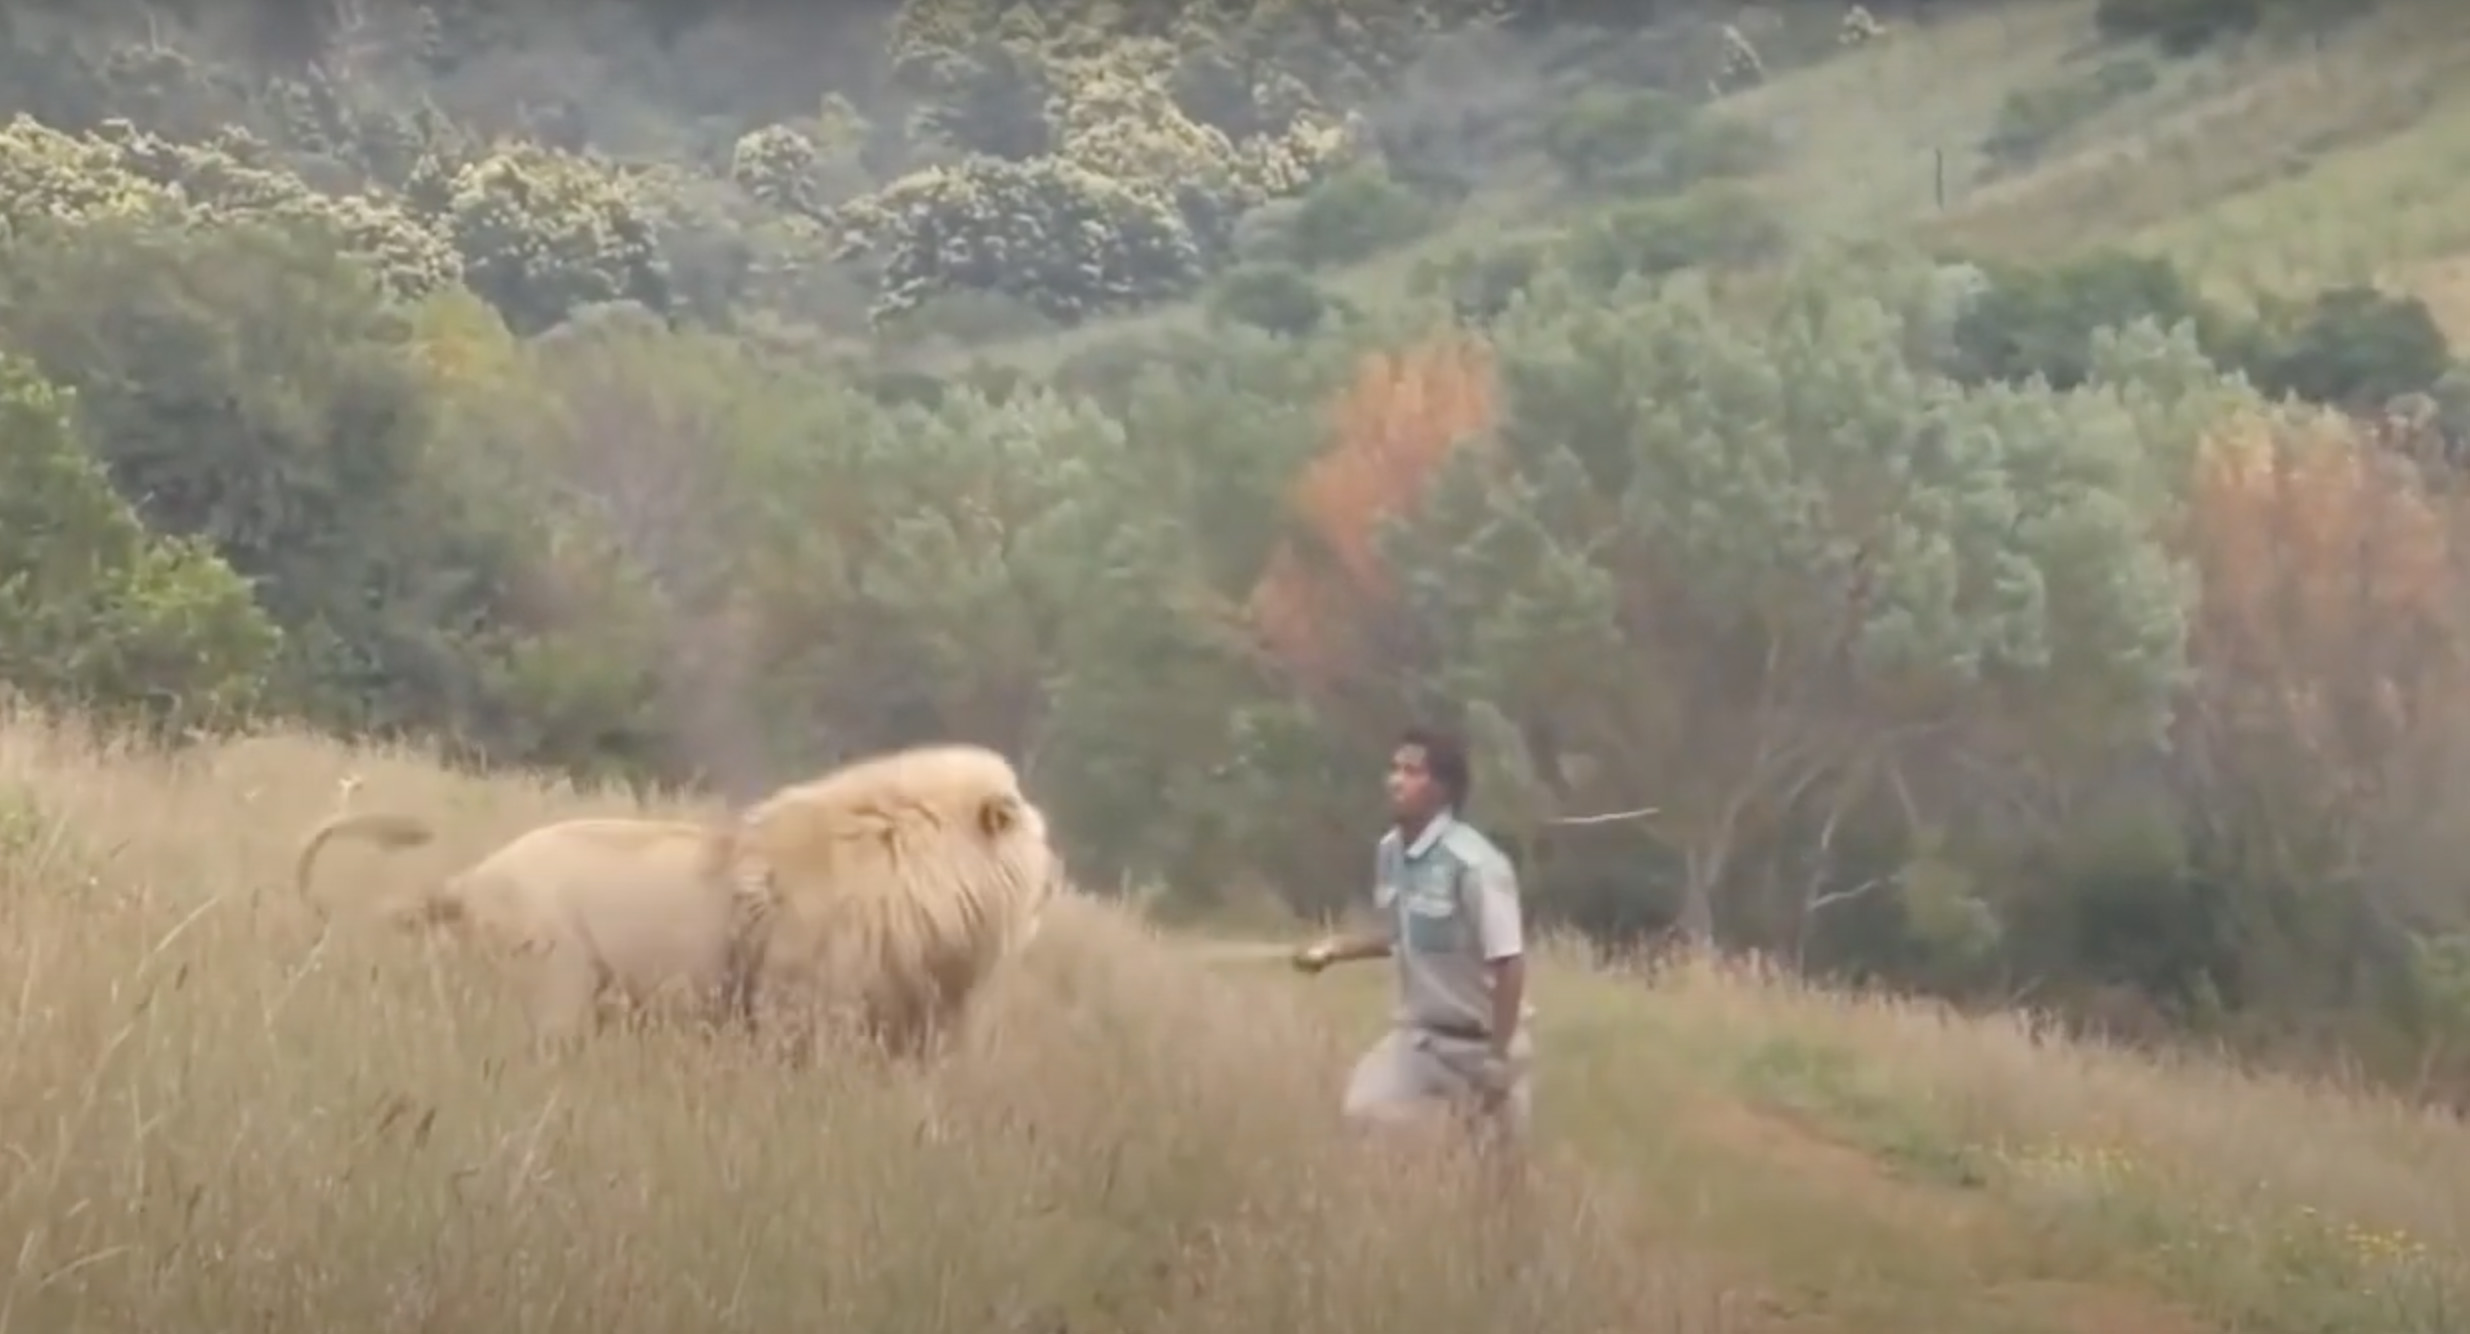 Here are 6 scary lion encounters that gonna shock you